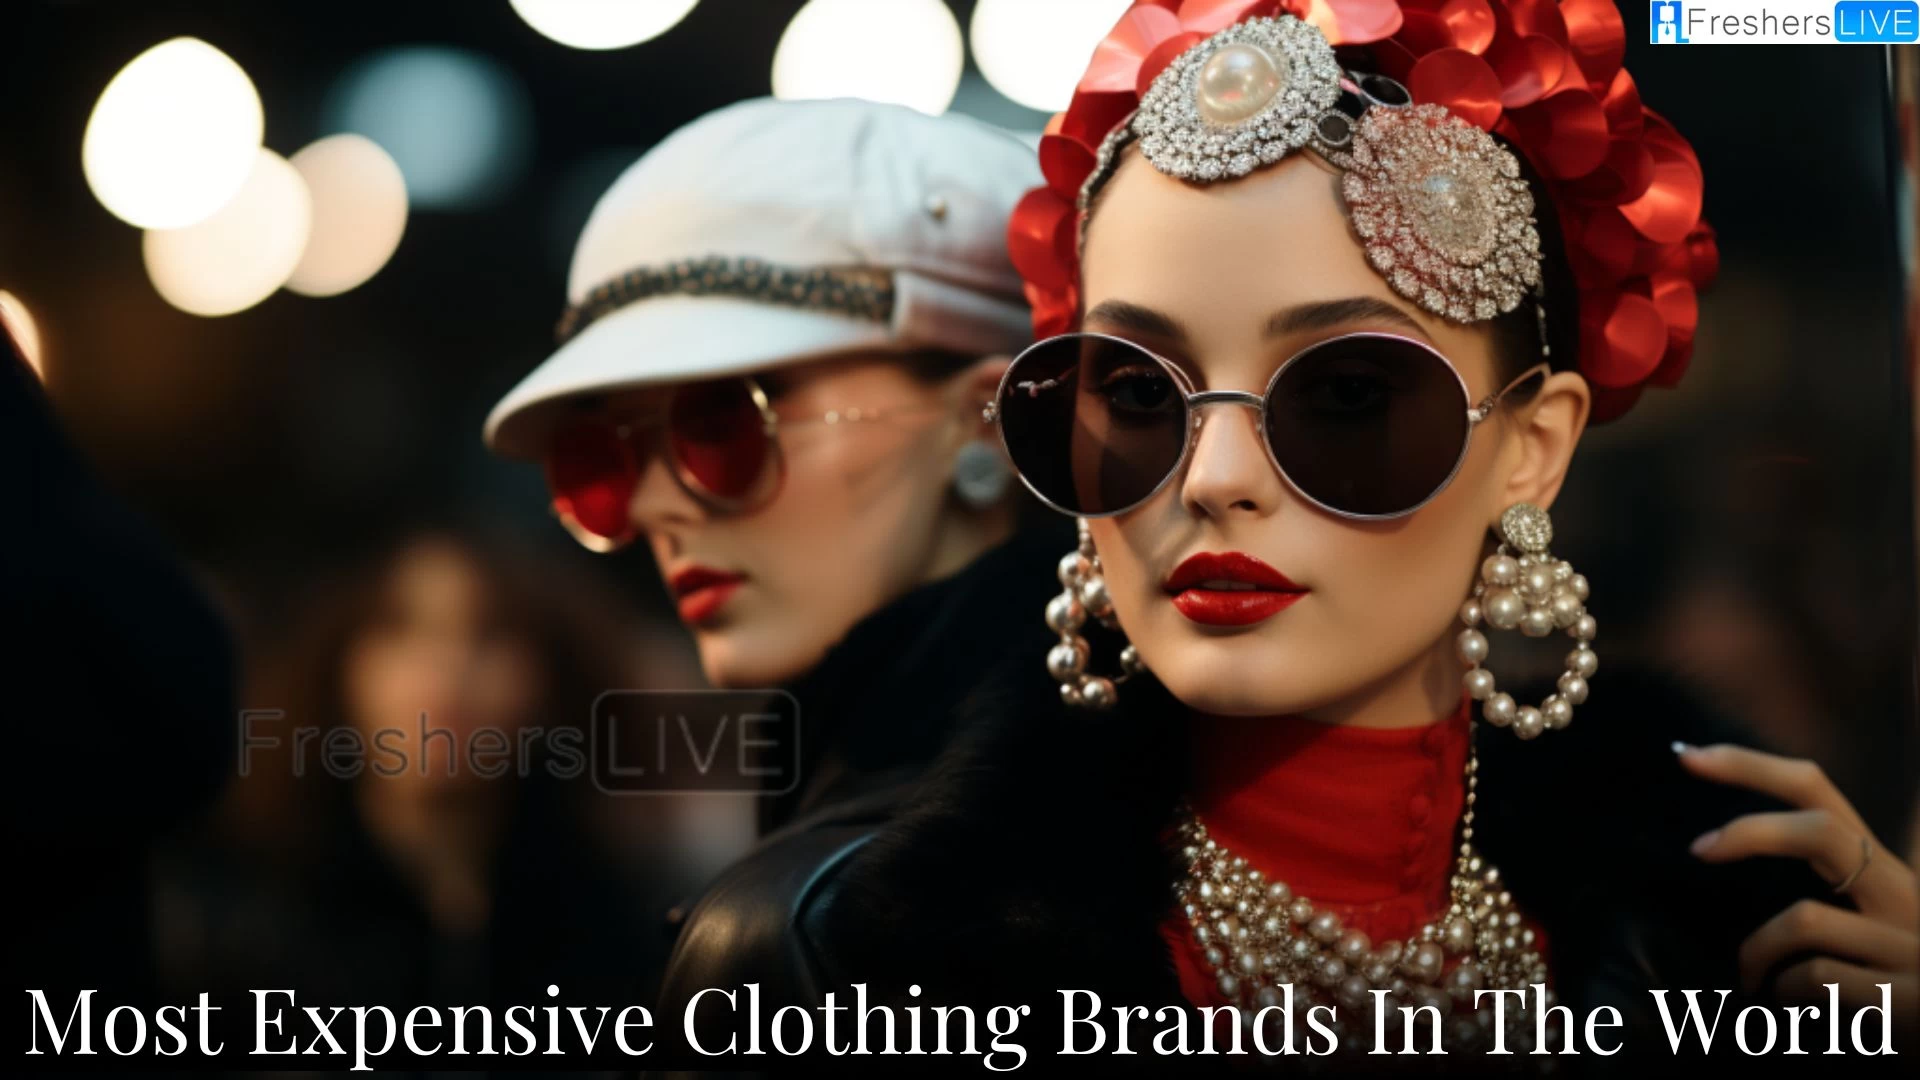 Most Expensive Clothing Brands in the World - Exploring the Top 10